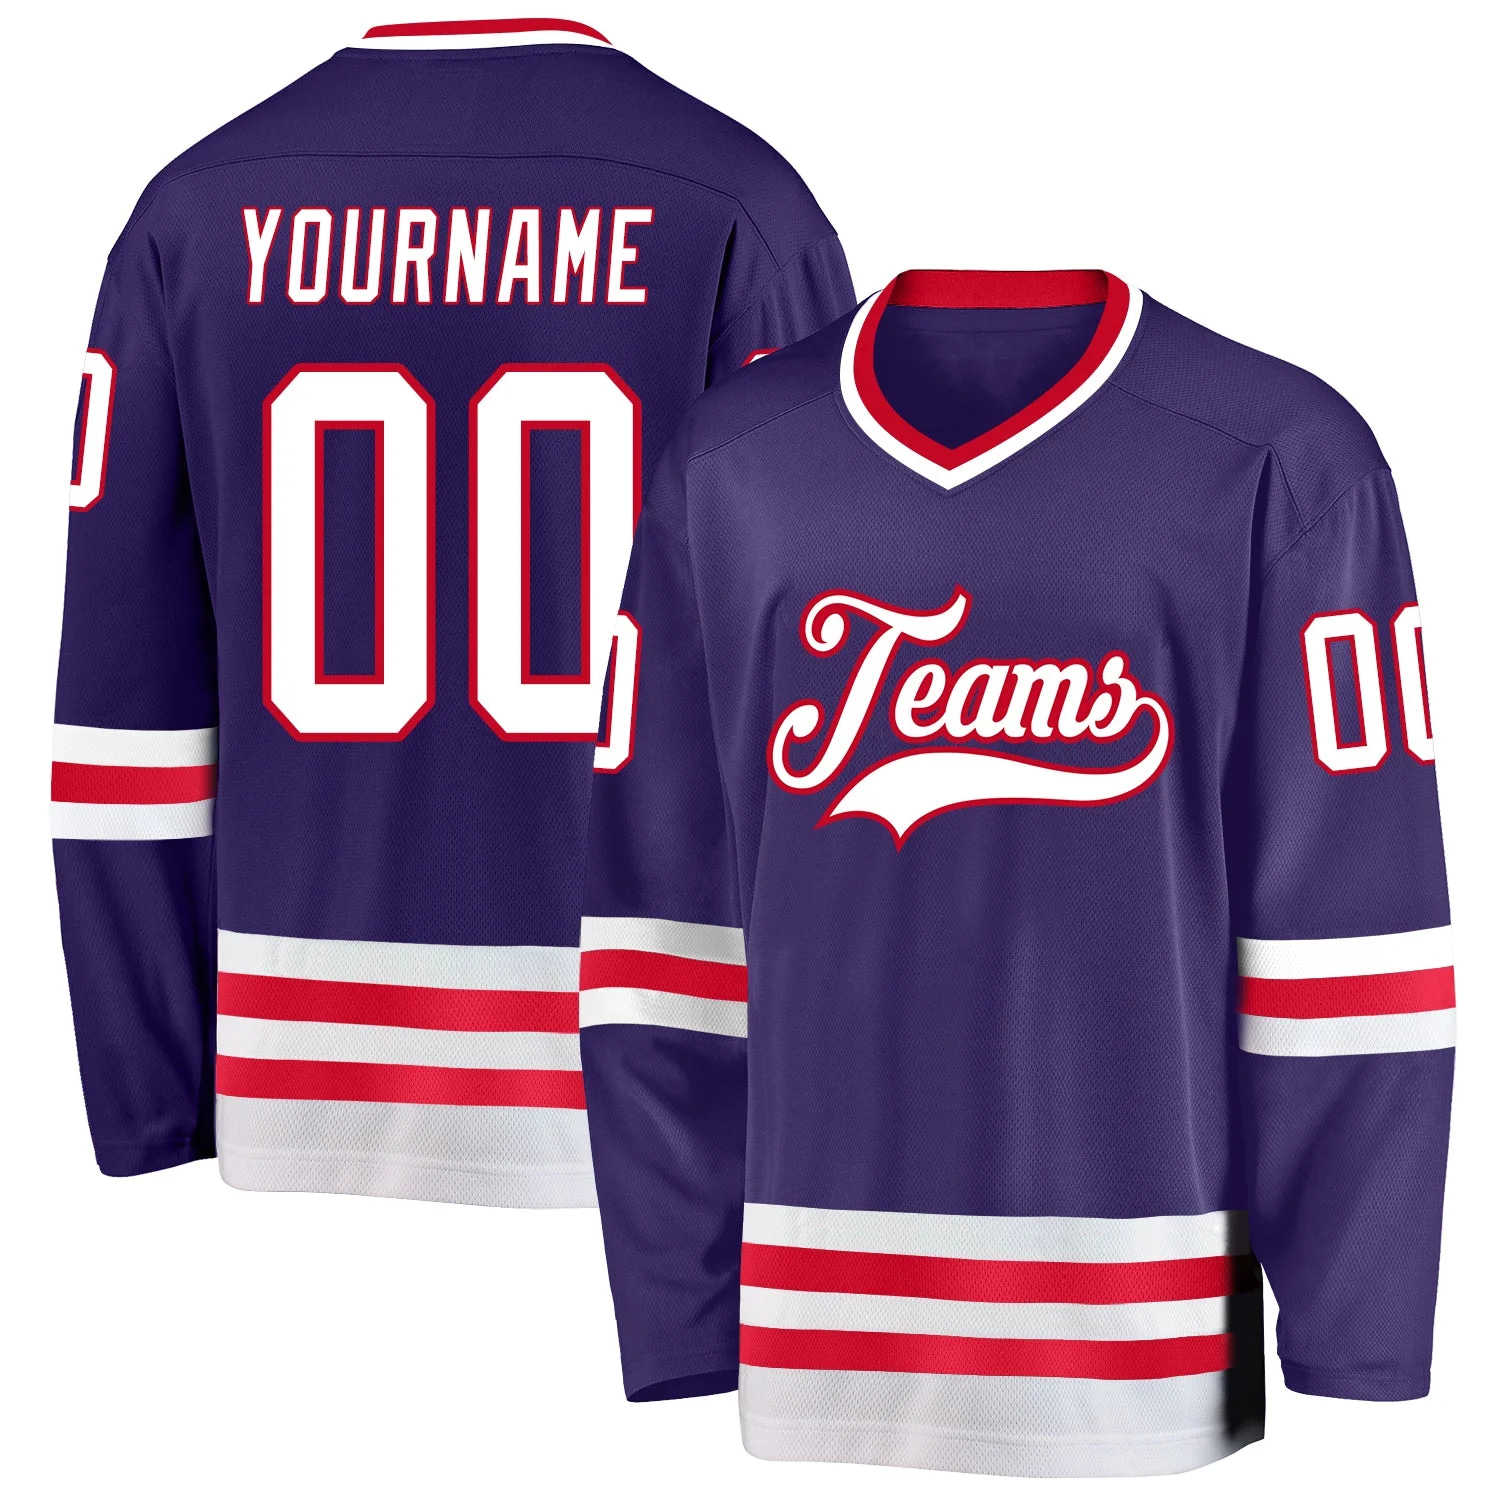 Stitched And Print Purple White-red Hockey Jersey Custom